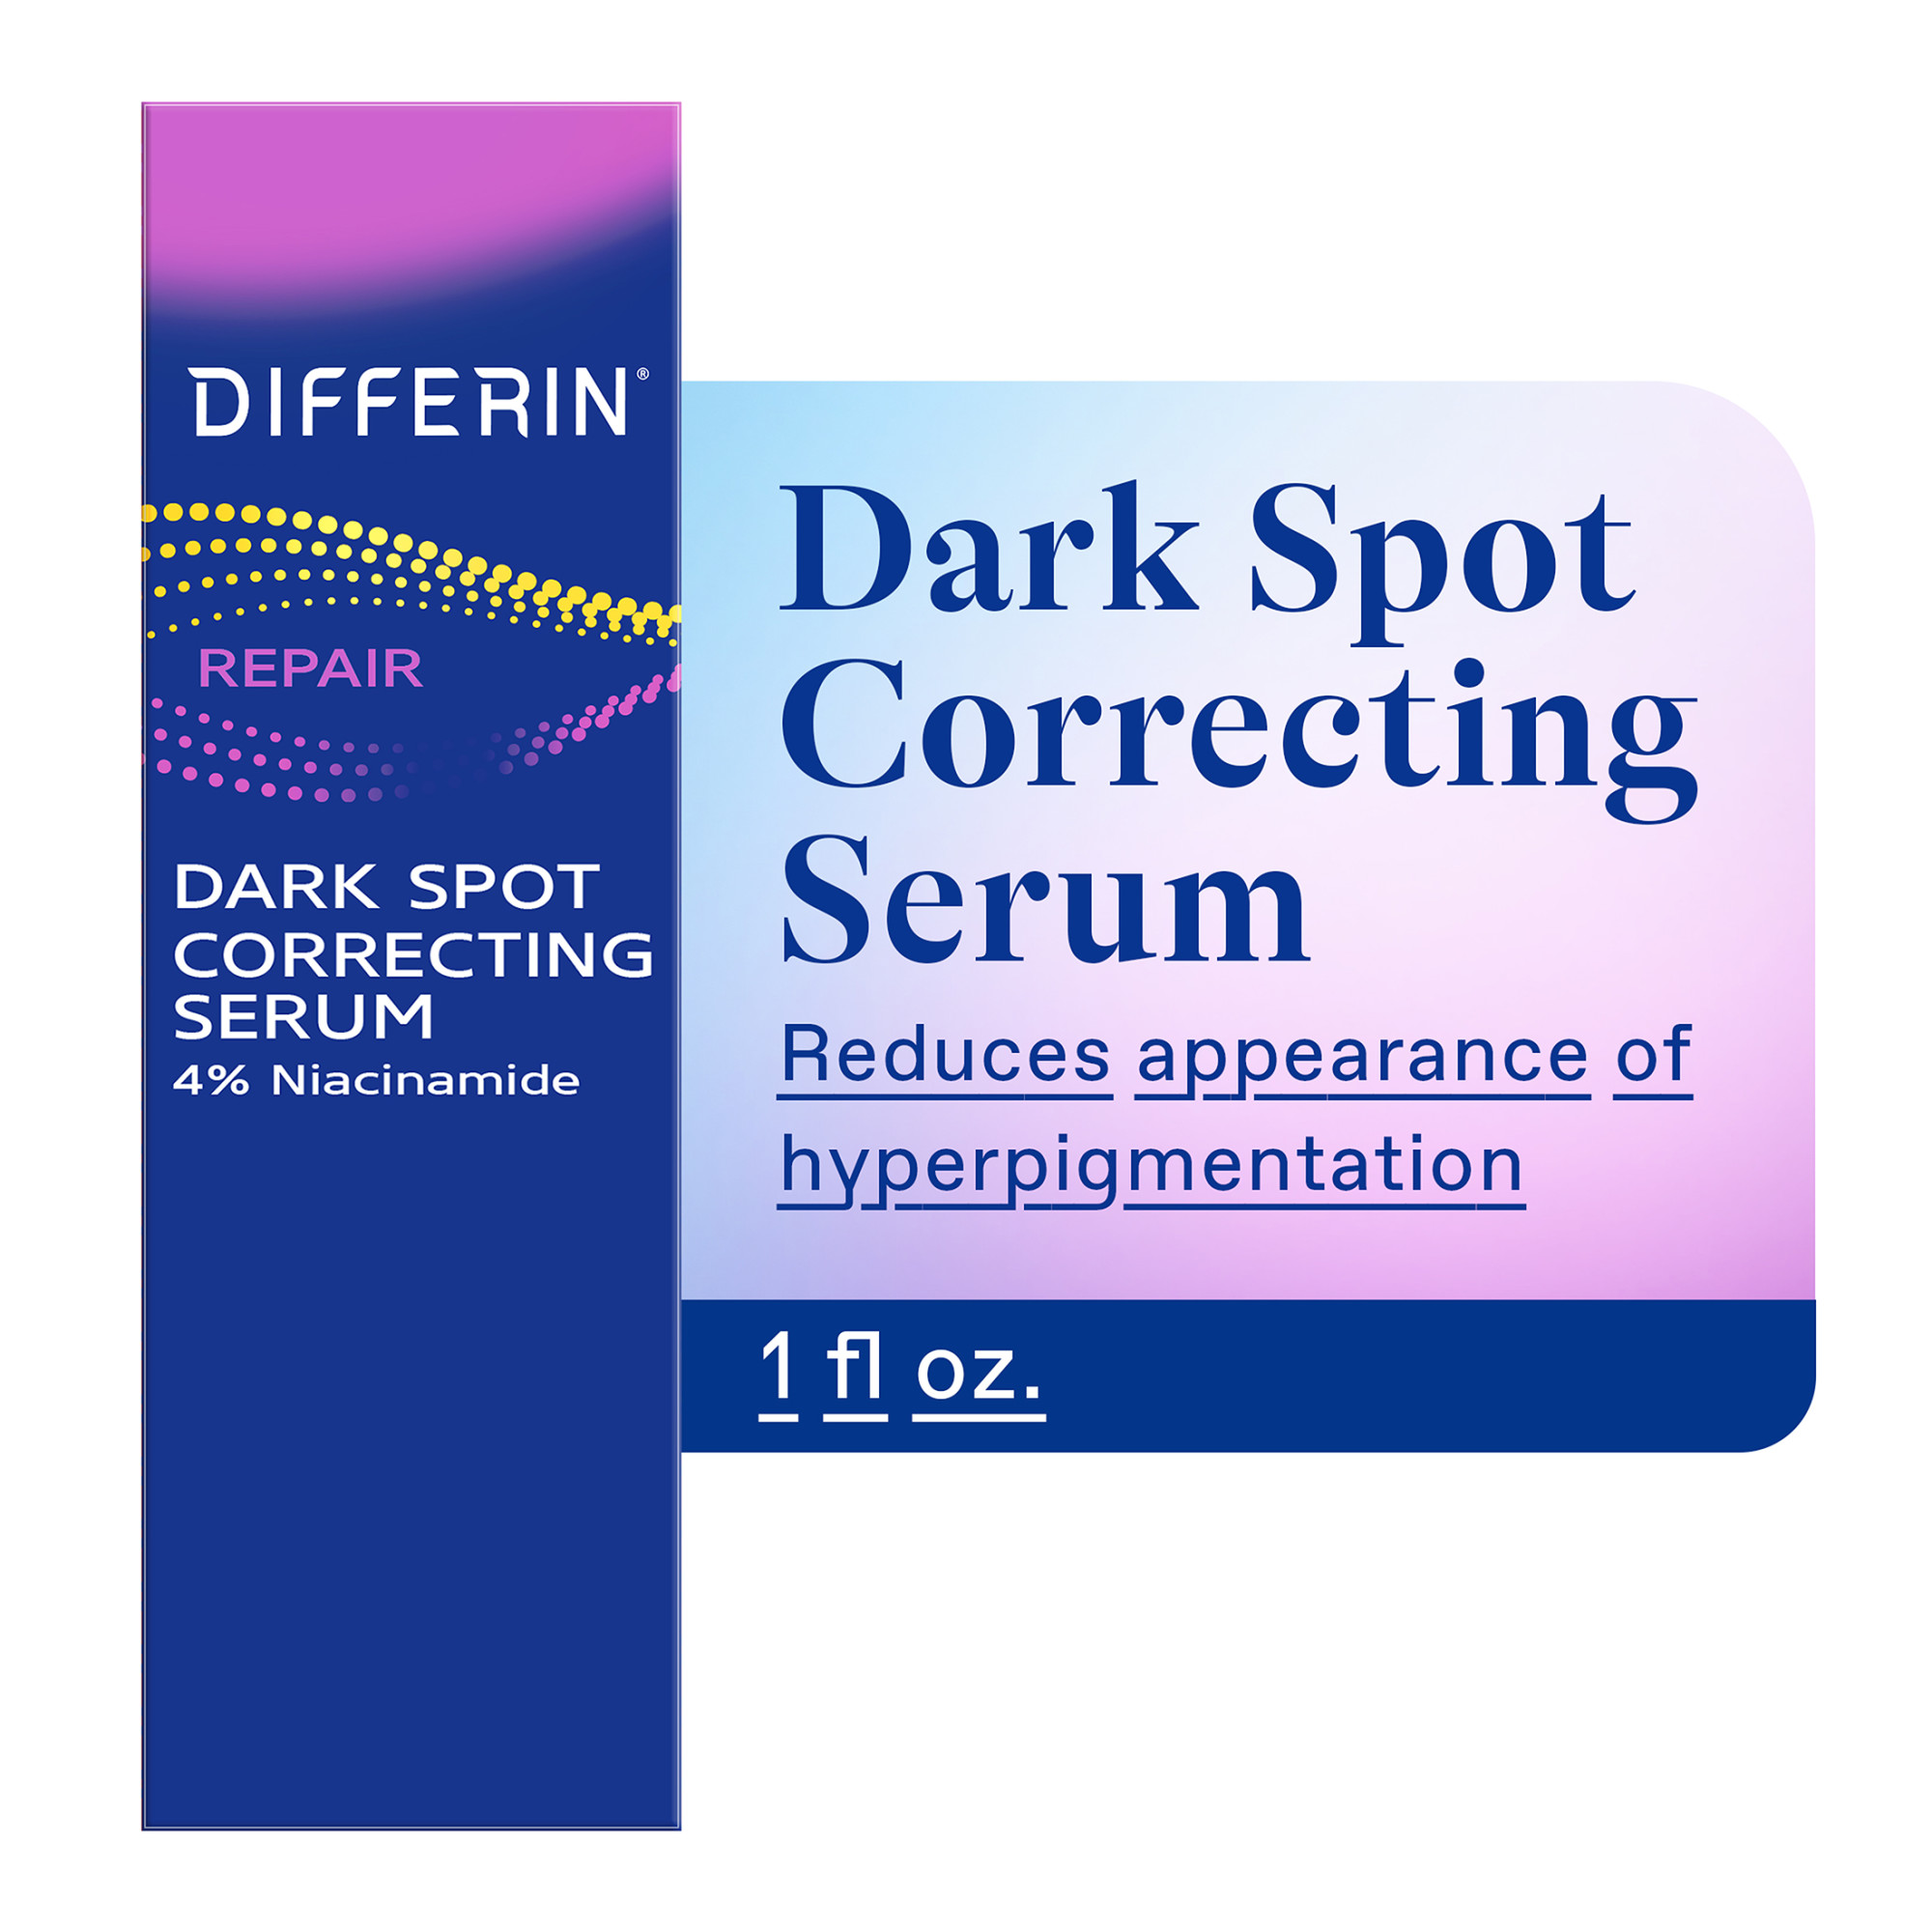 Differin Dark Spot Correcting Serum for Dark Spots and Discoloration, 1 oz - image 1 of 12